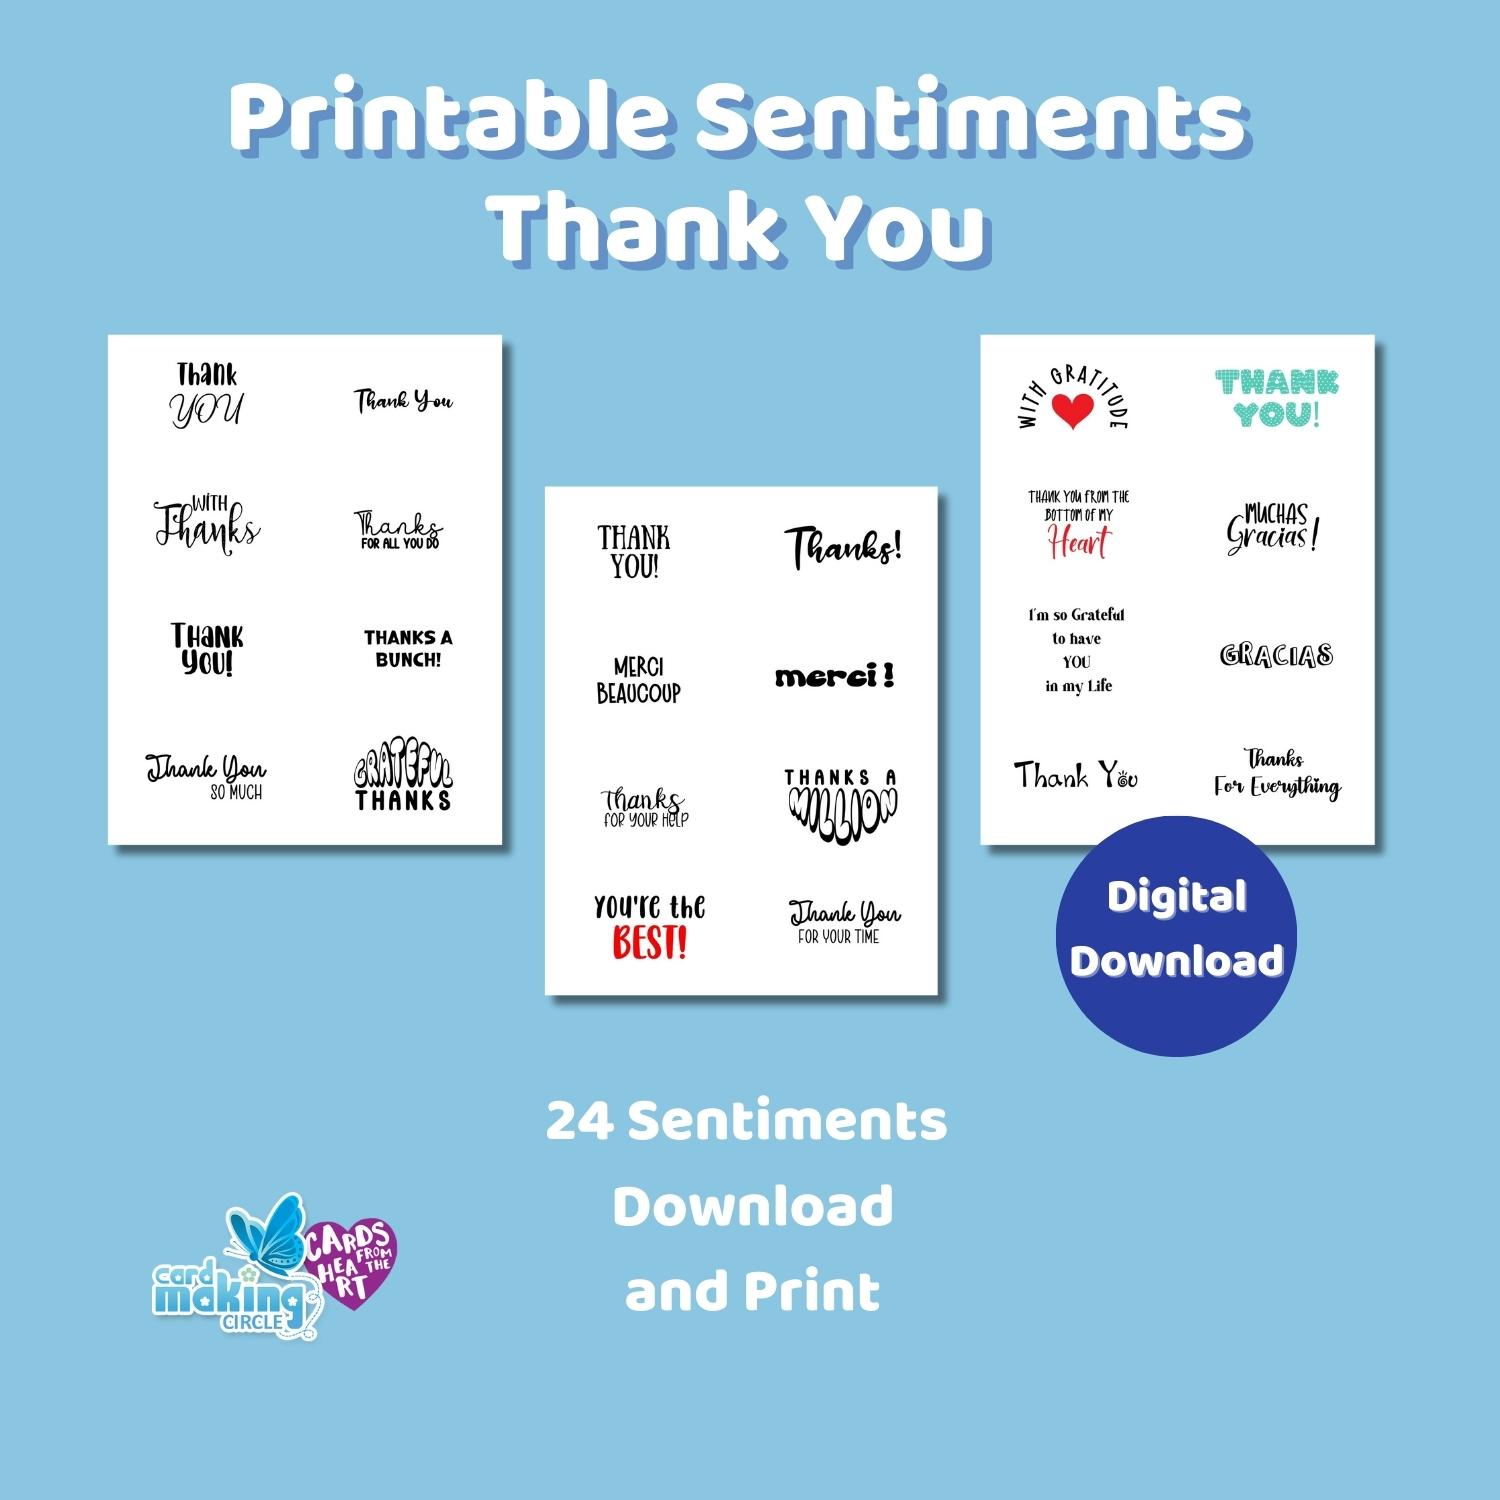 Thank you printable sentiments for you to download and print at home